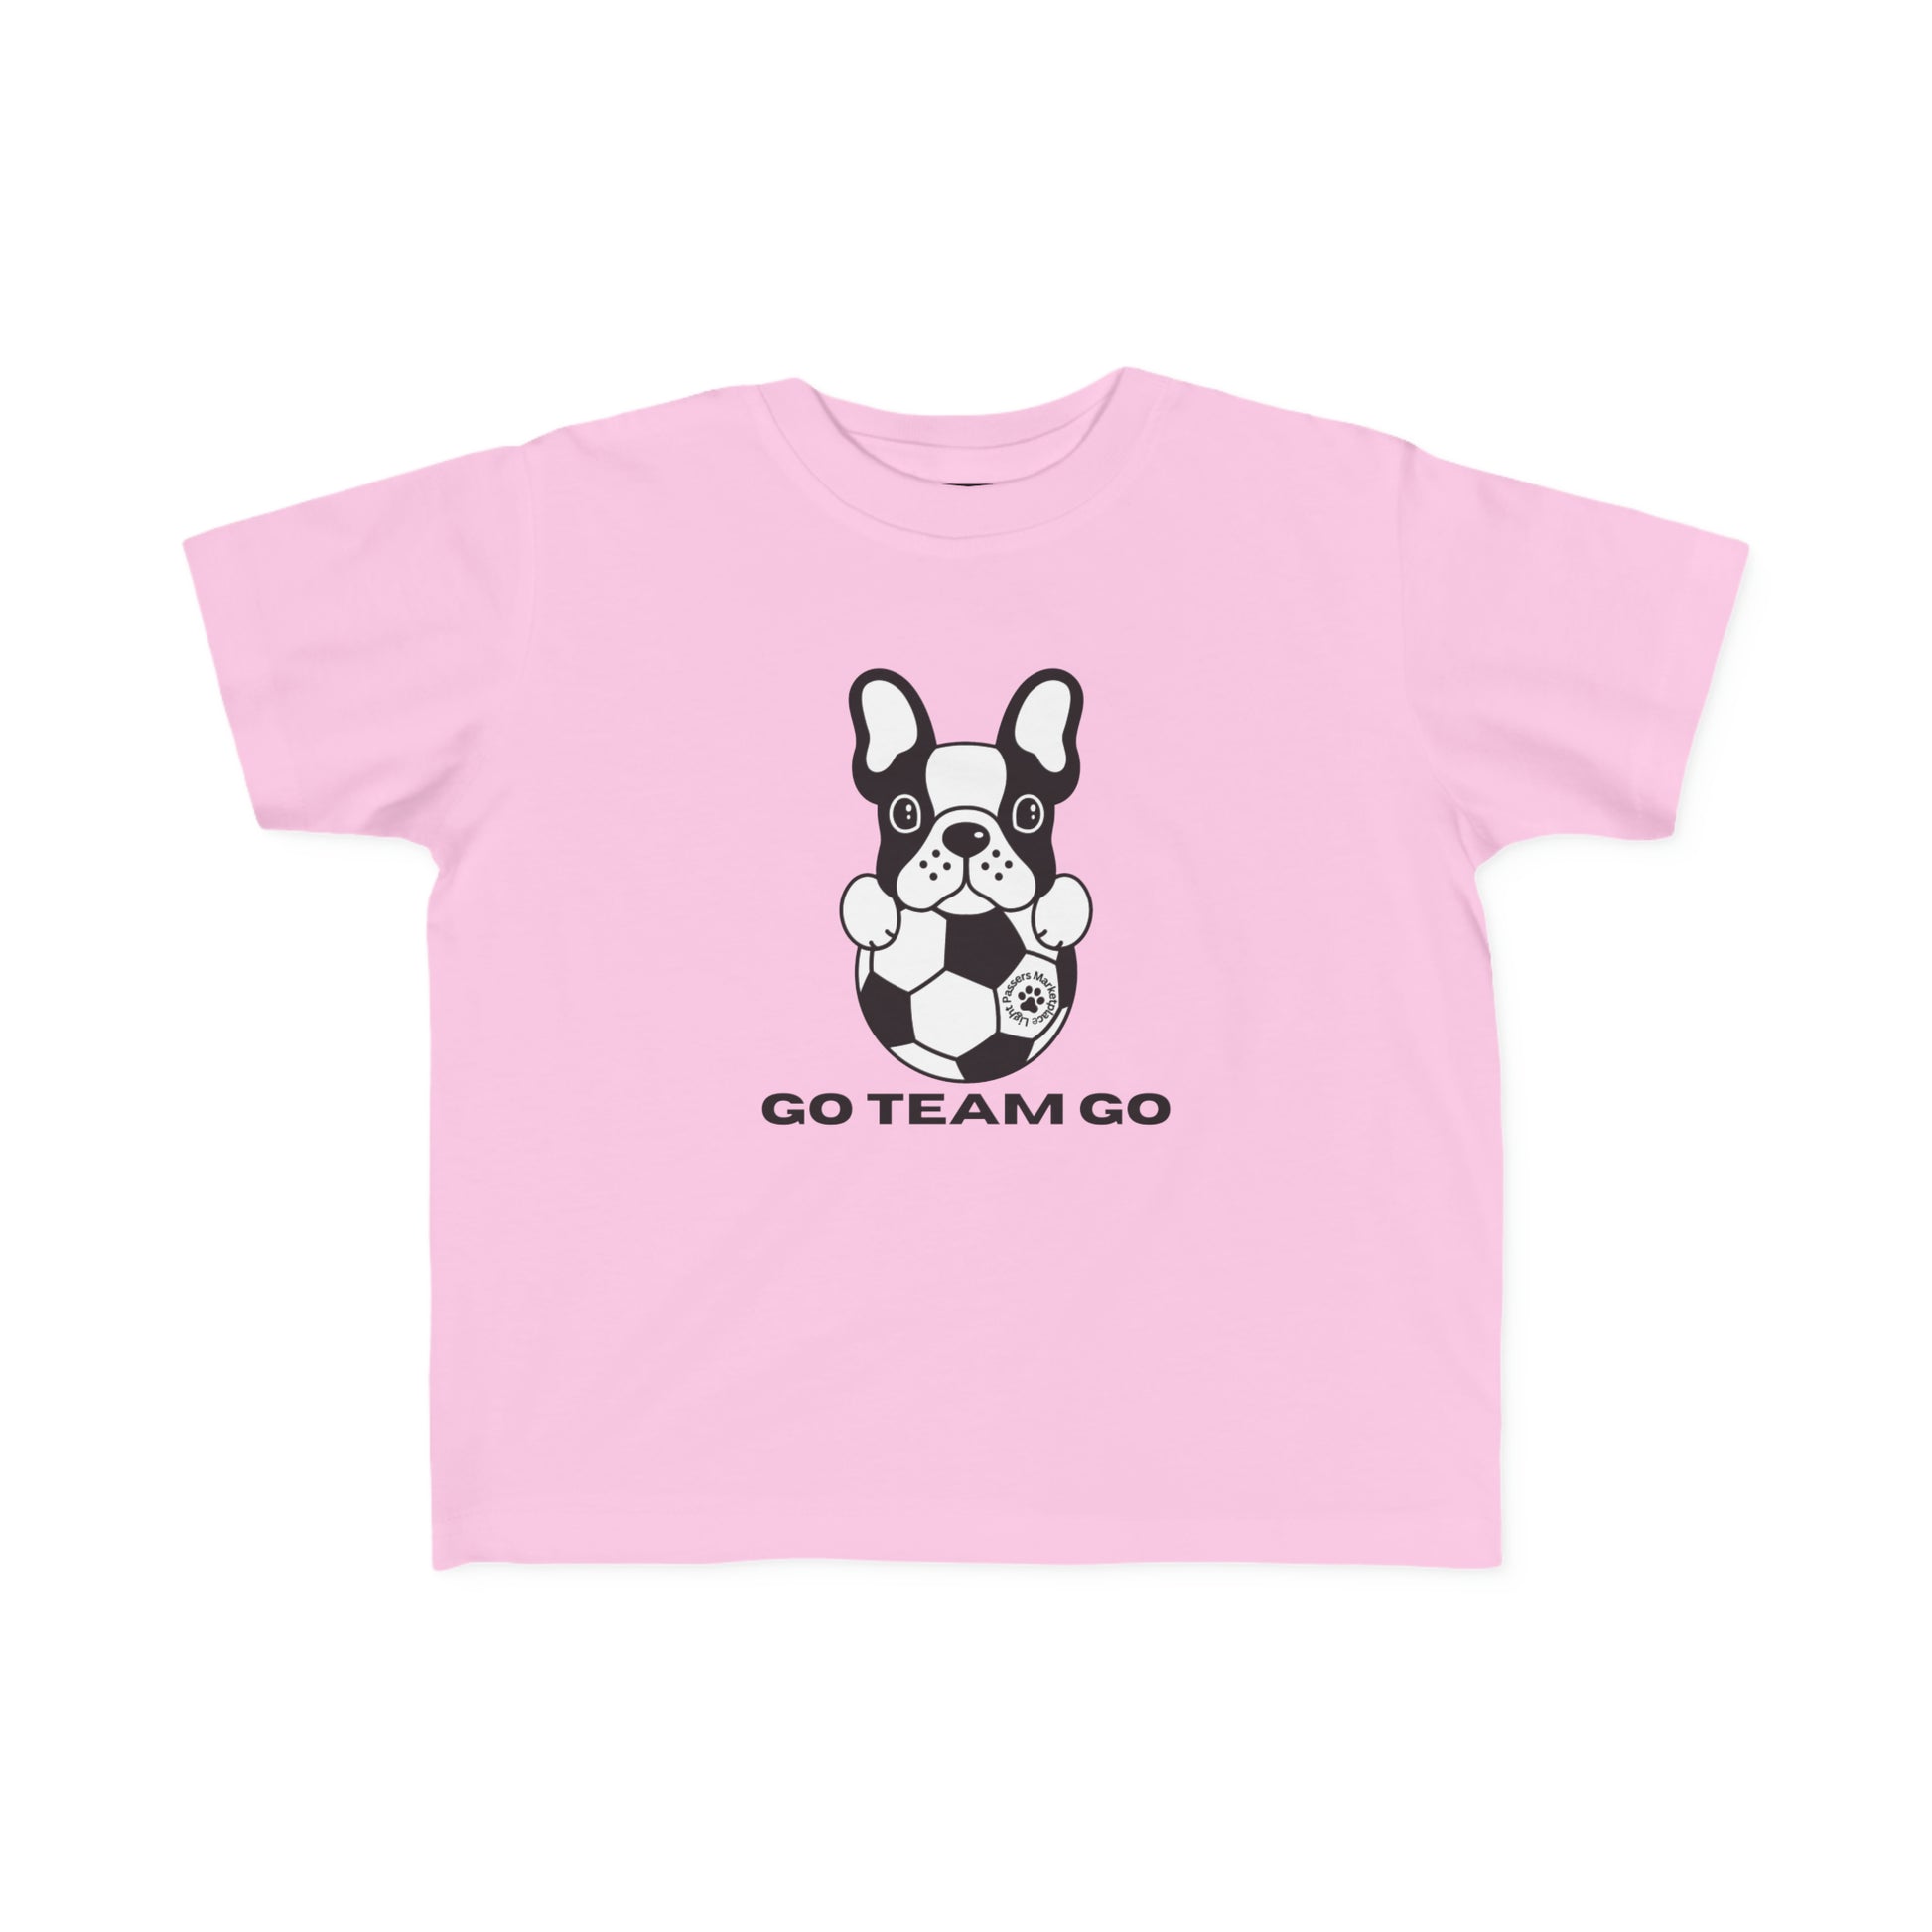 Toddler t-shirt featuring a dog playing soccer, made of soft 100% combed cotton. Durable print, light fabric, tear-away label, classic fit, true to size. Ideal for sensitive skin.